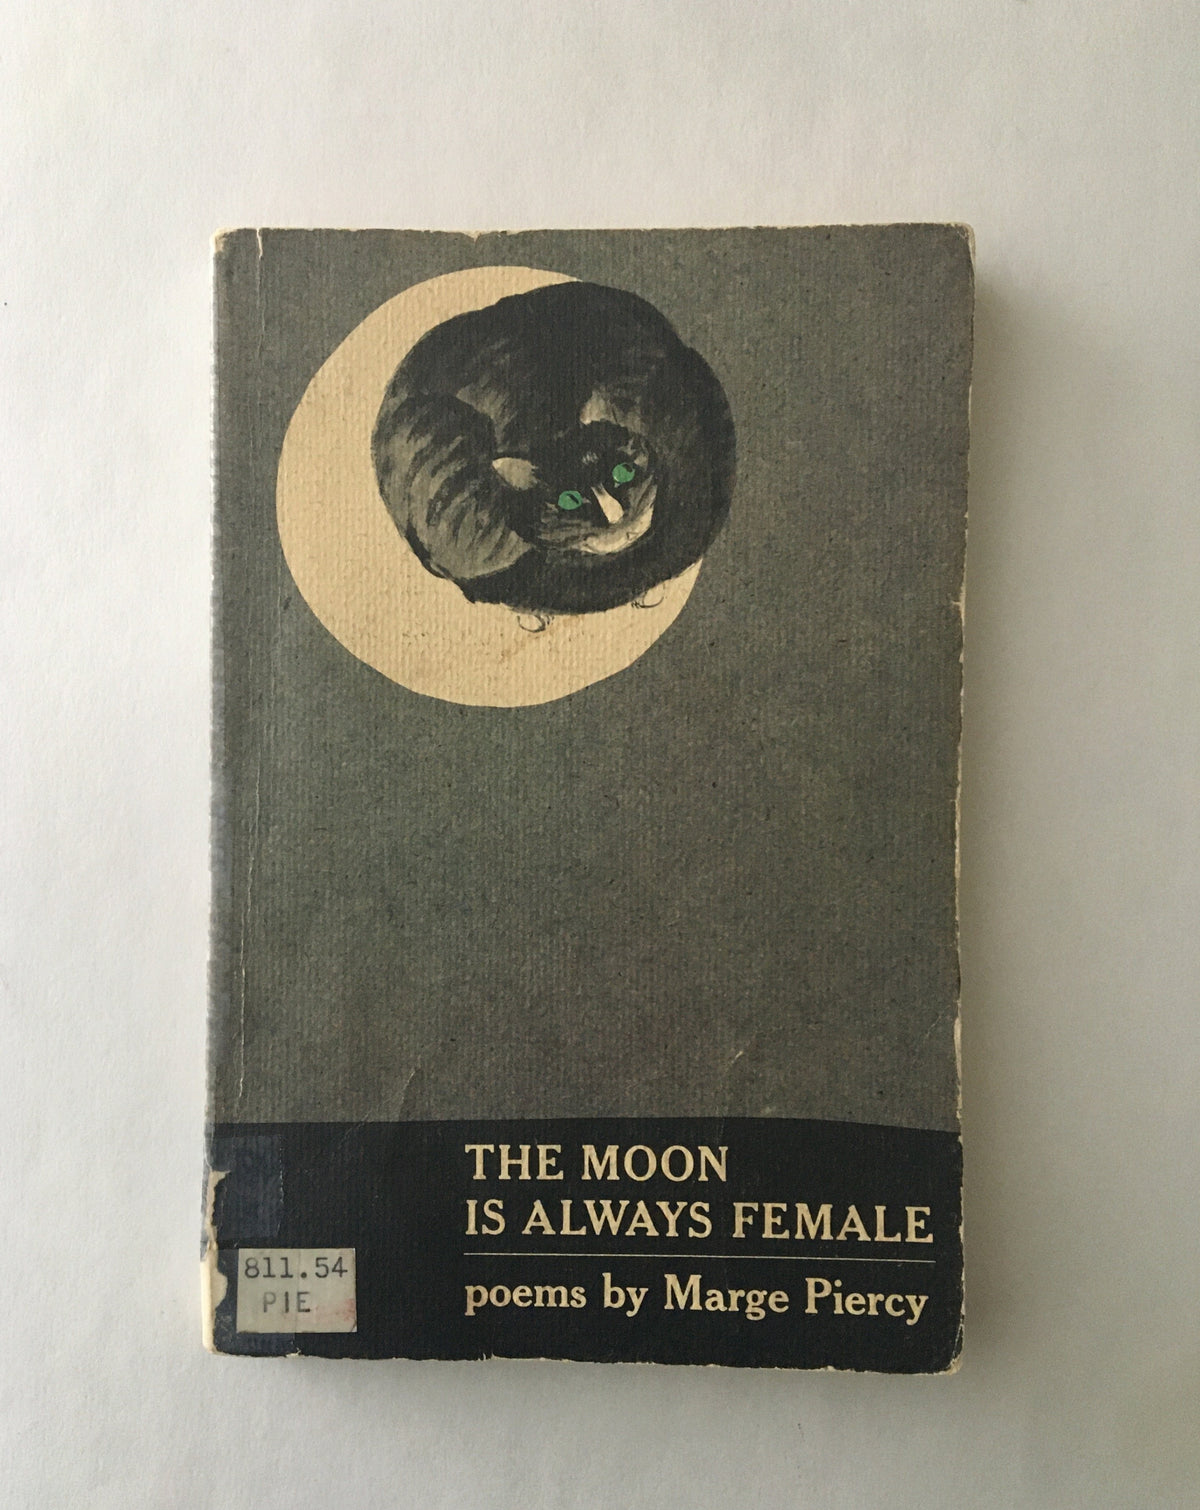 The Moon is Always Female by Marge Piercy